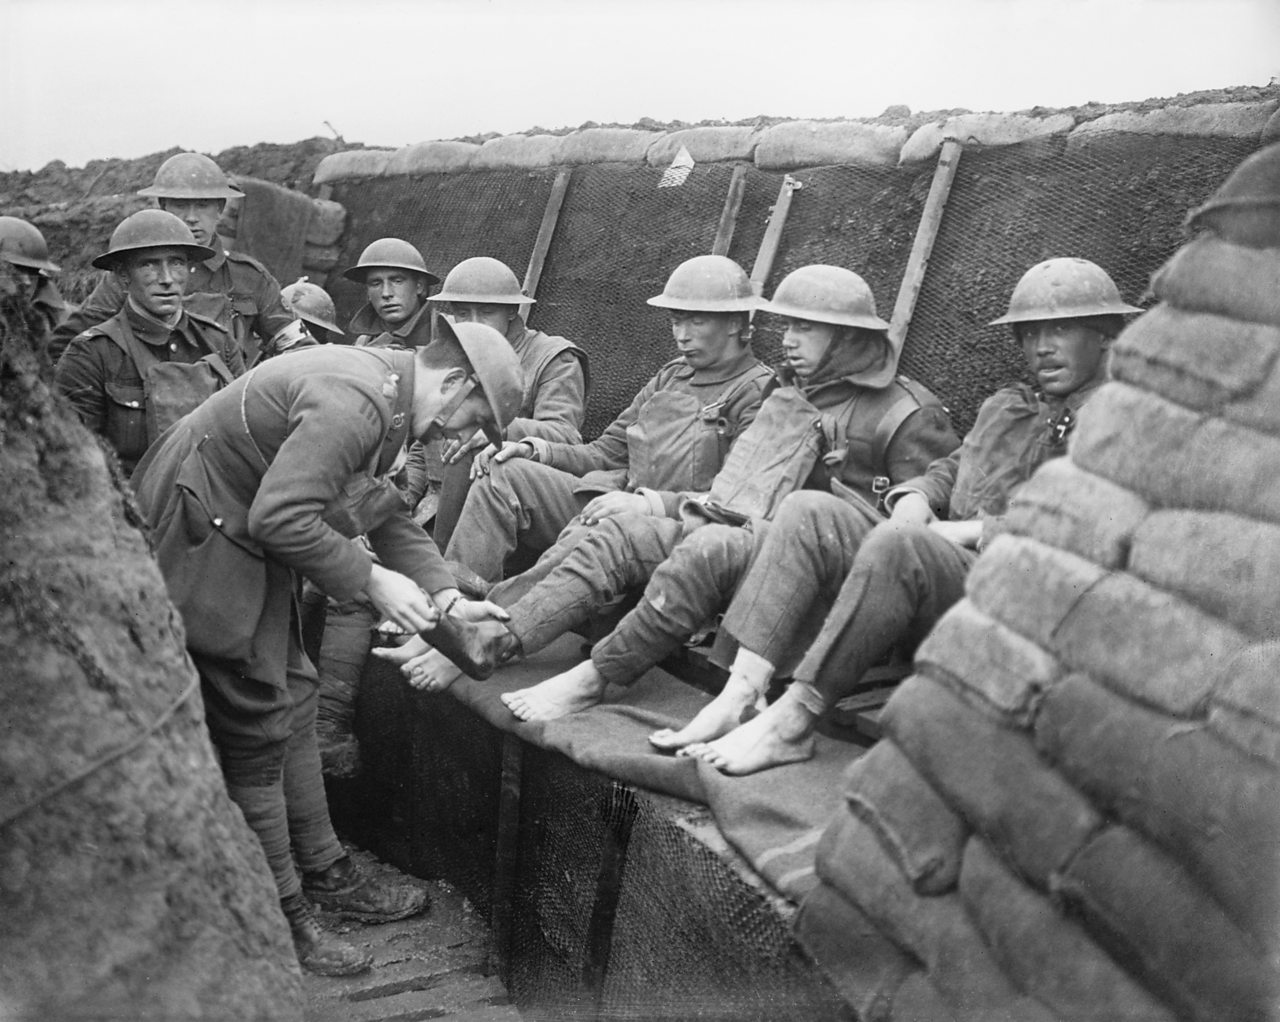 Describing Life In The Trenches